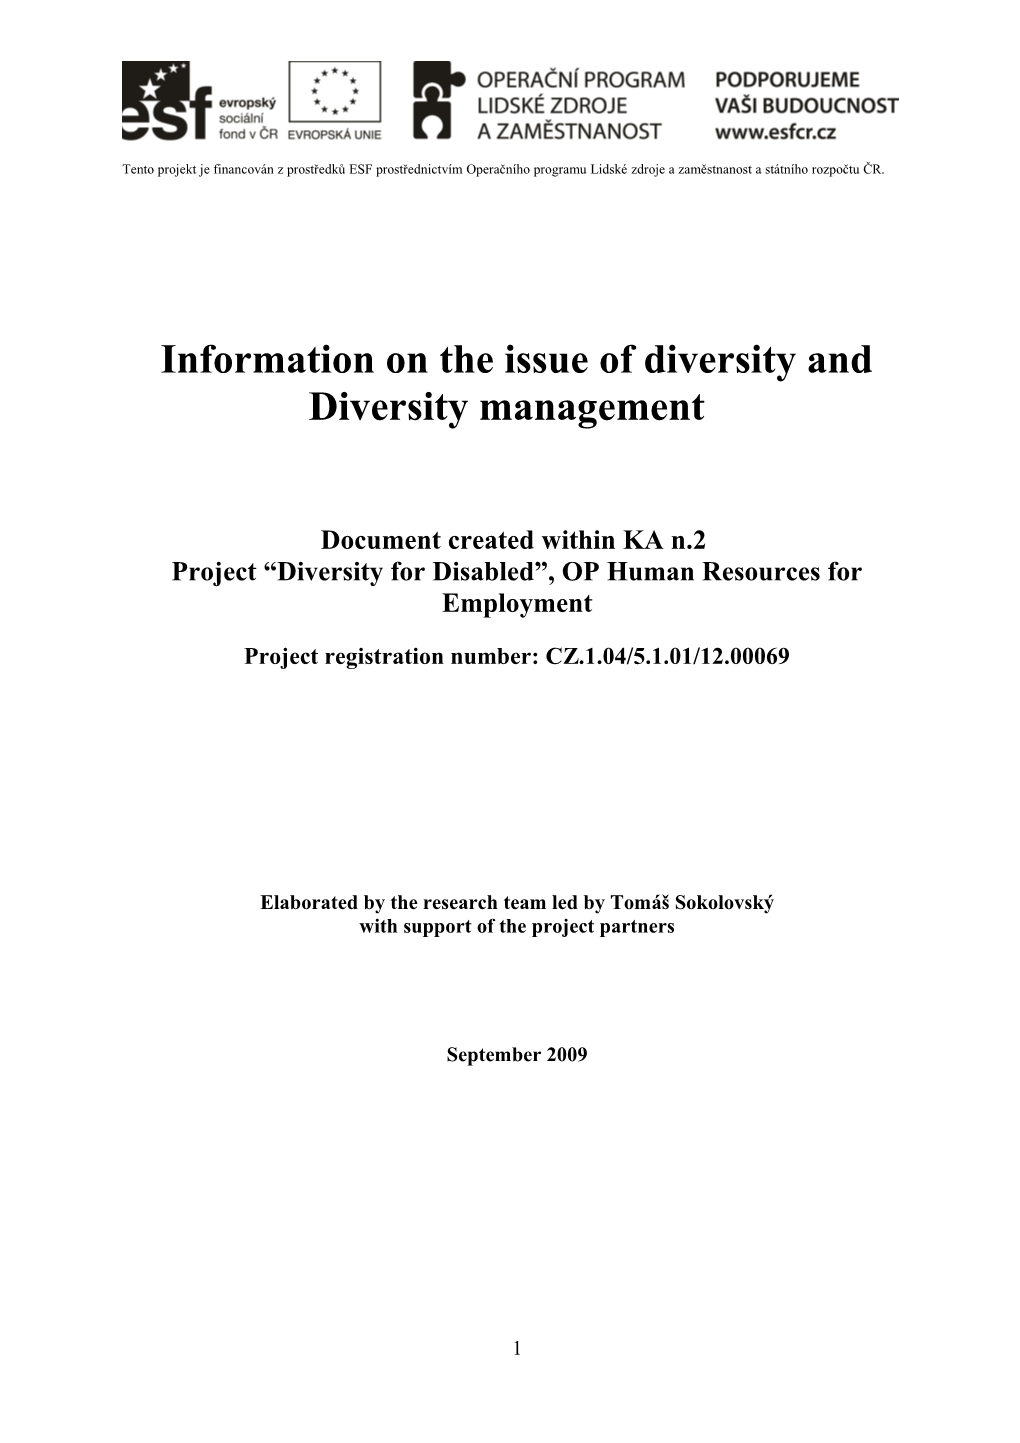 Information on the Issue of Diversity and Diversity Management